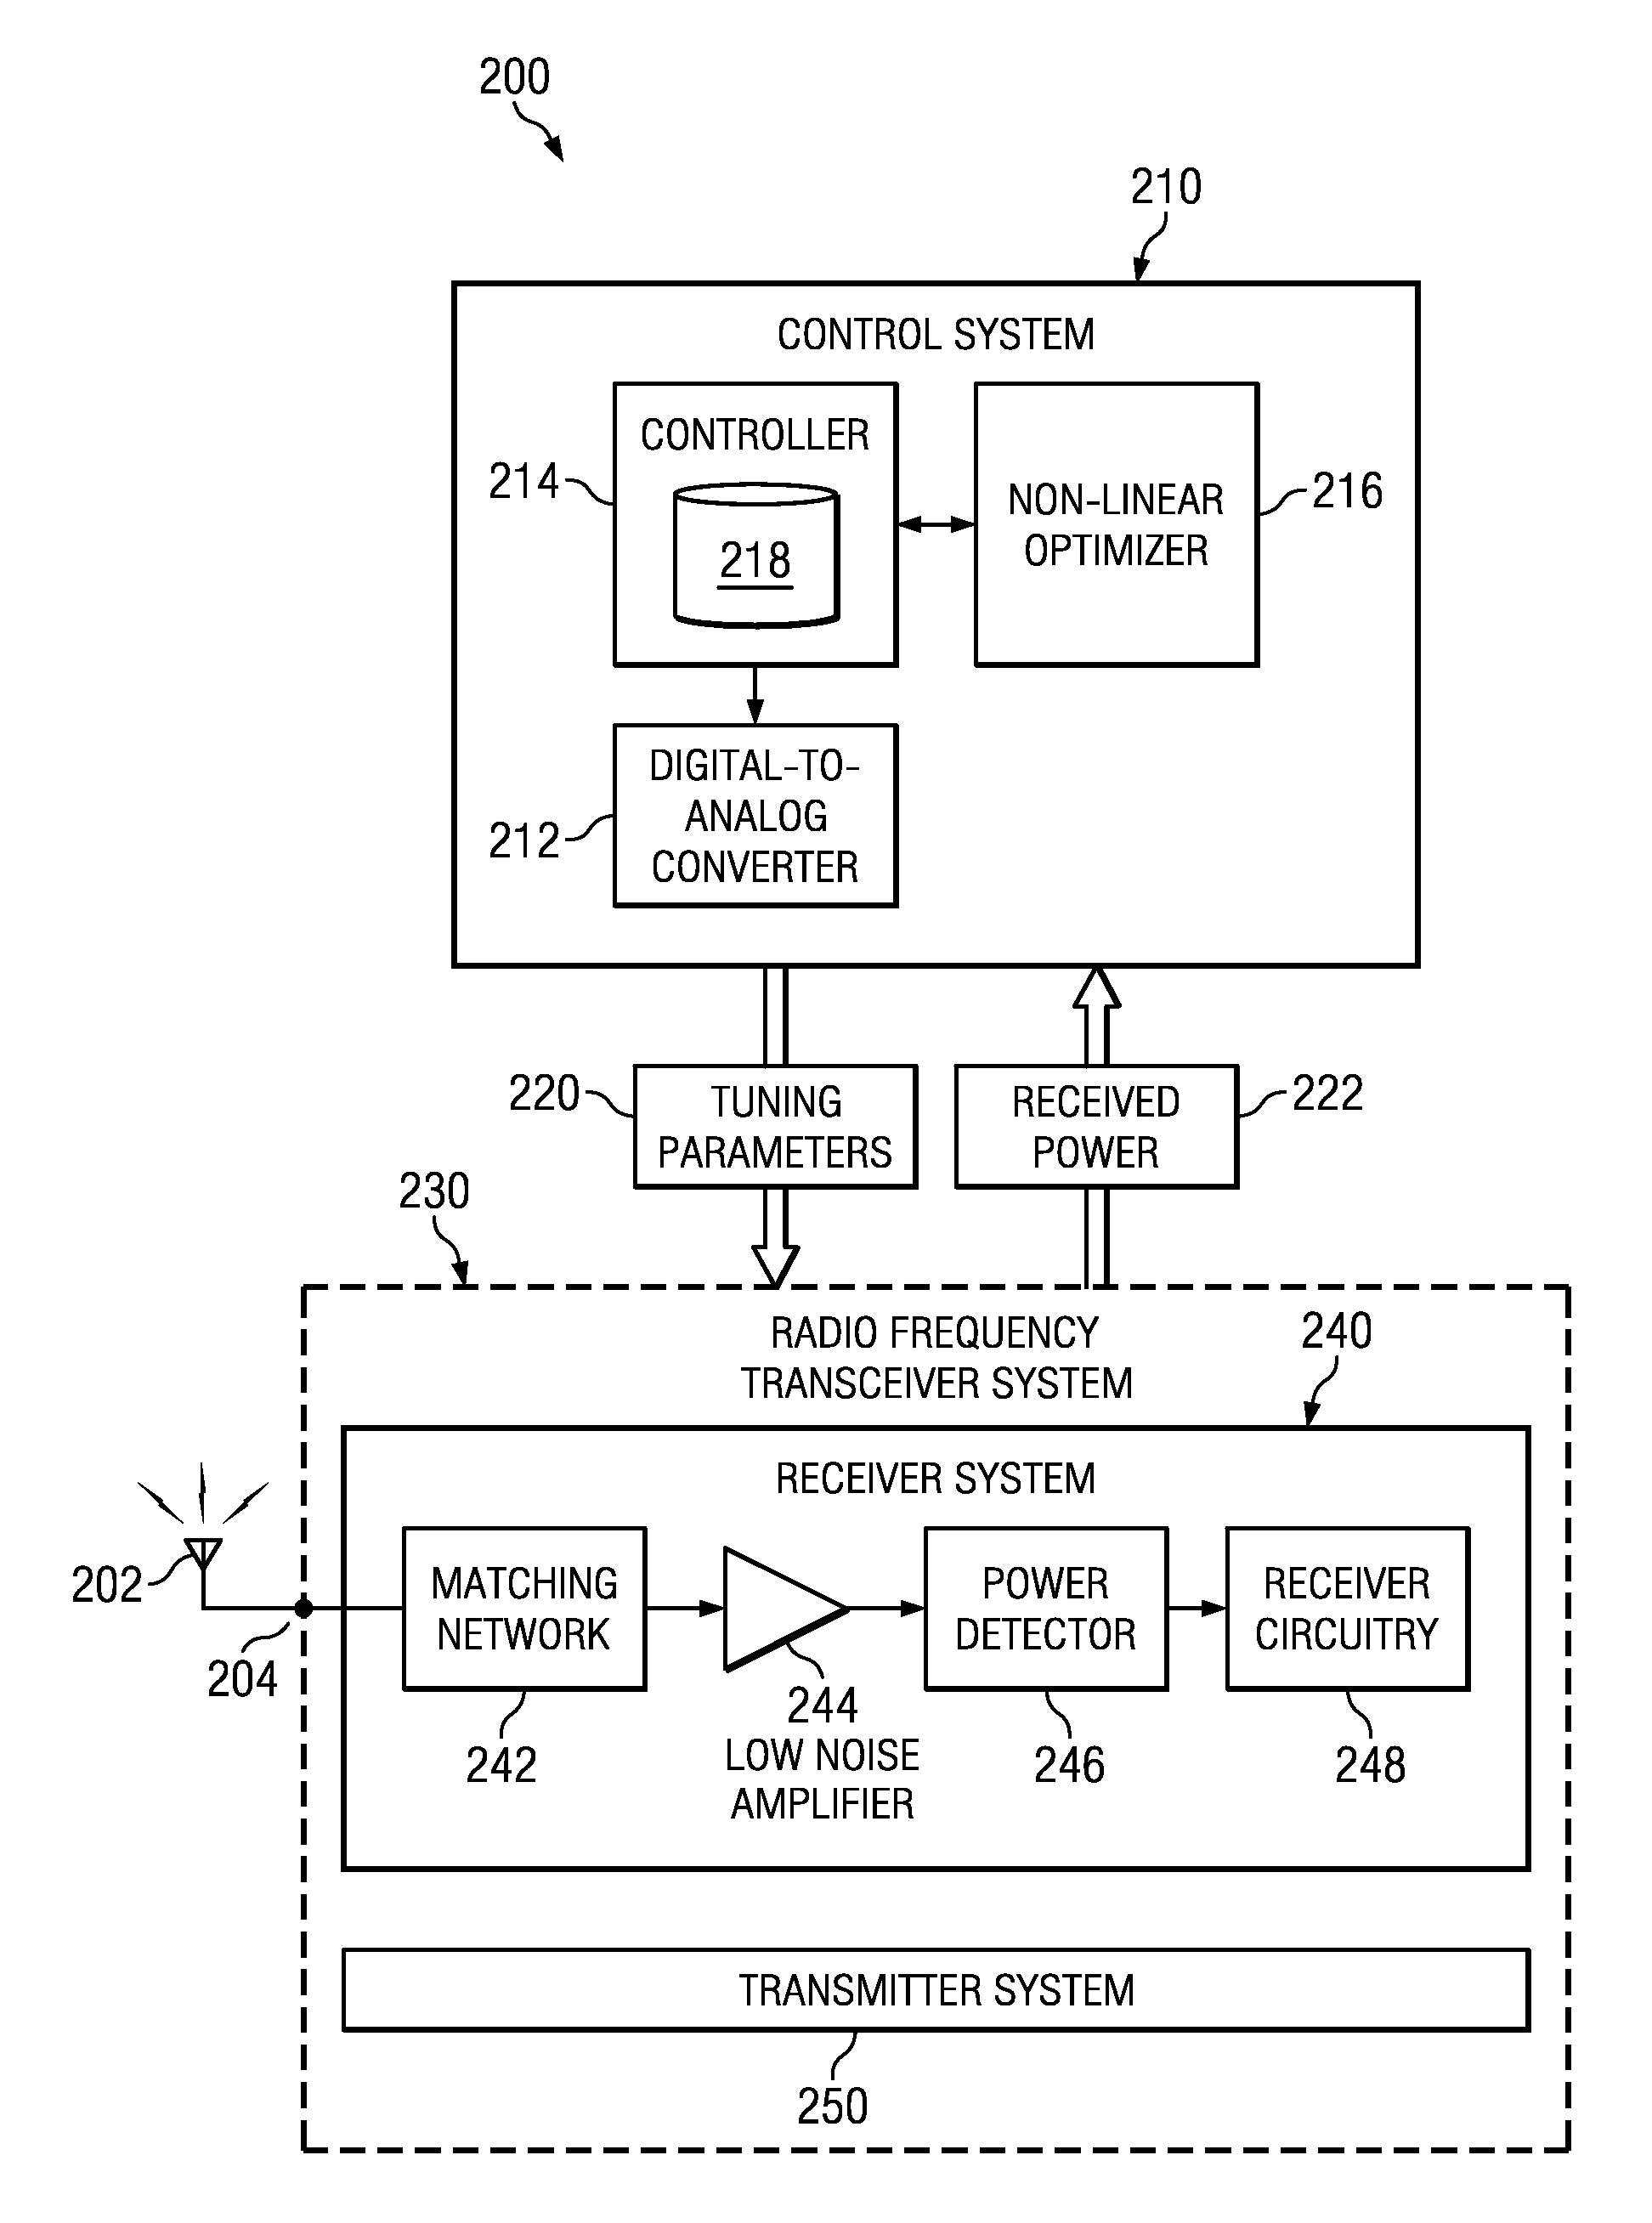 Dynamic real-time calibration for antenna matching in a radio frequency receiver system